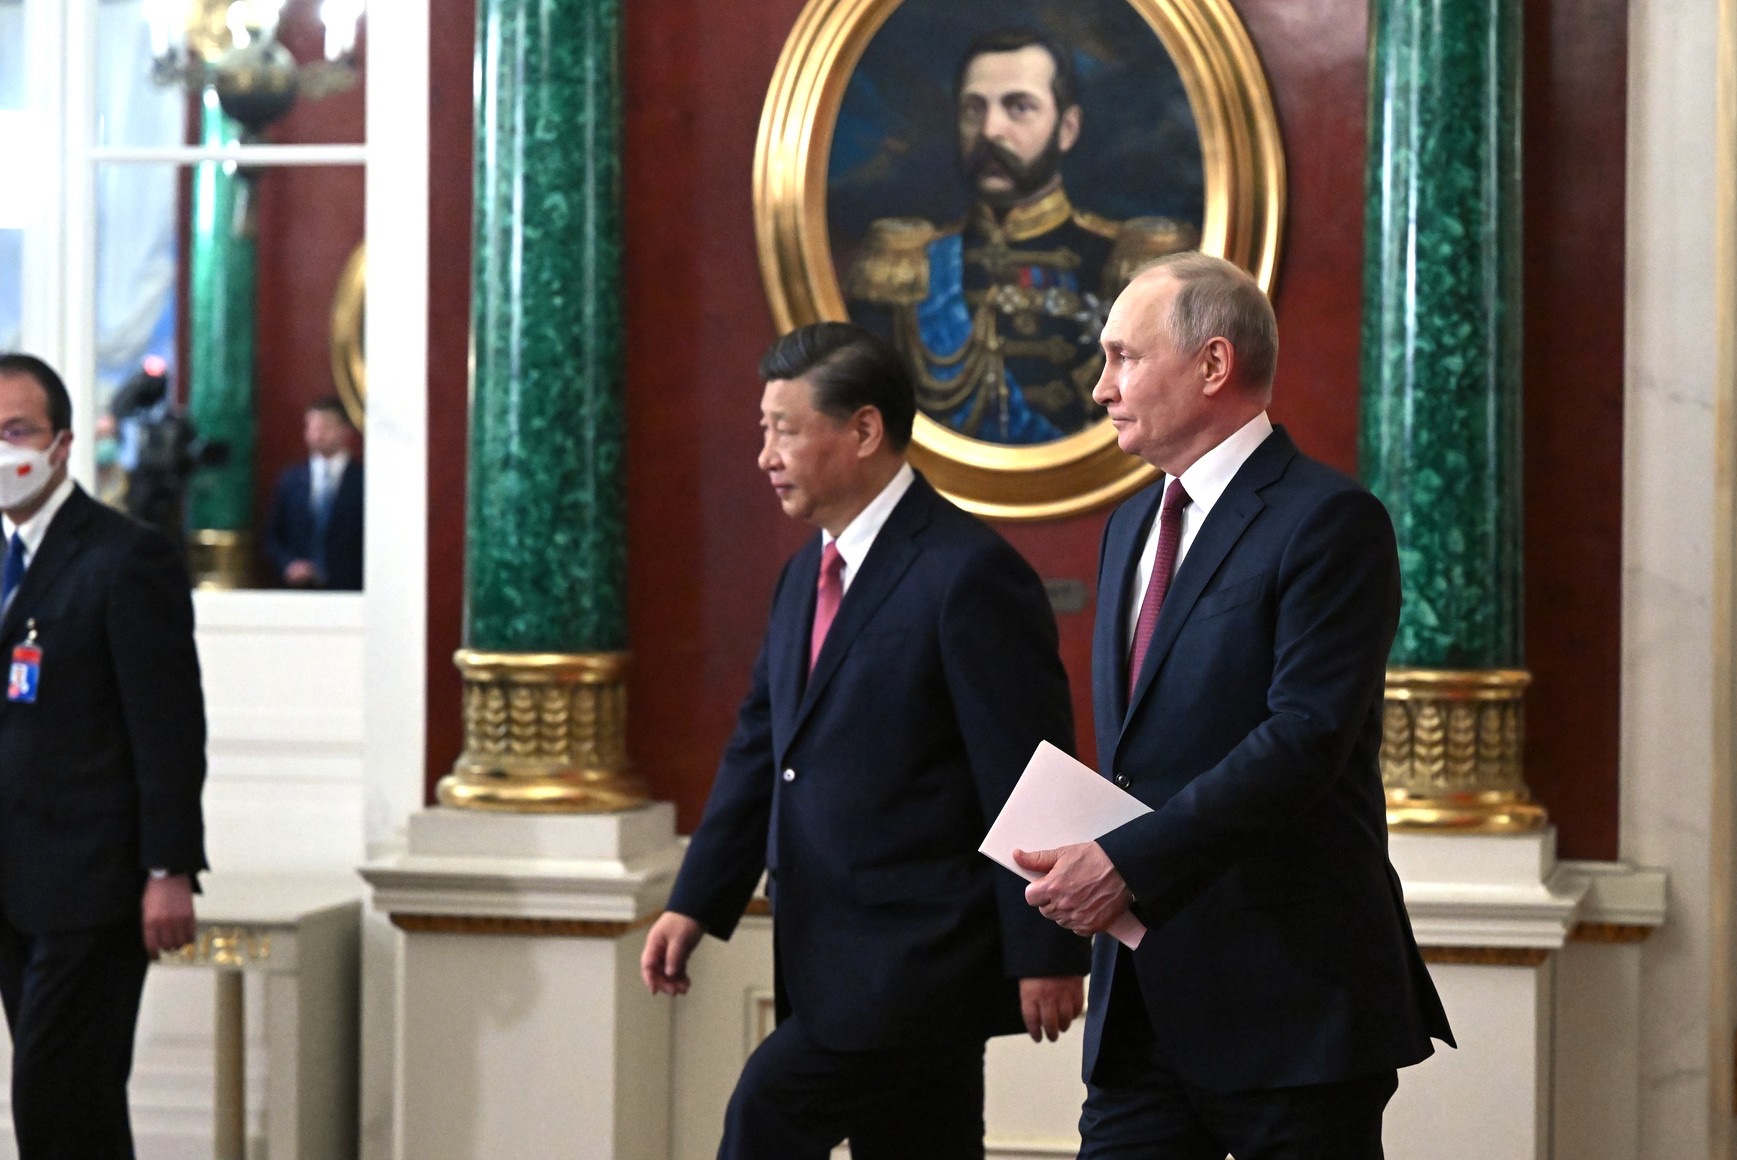 President of the People’s Republic of China Xi Jinping meets with President of Russia Vladimir Putin before the document signing ceremony in the Grand Kremlin Palace in Moscow.